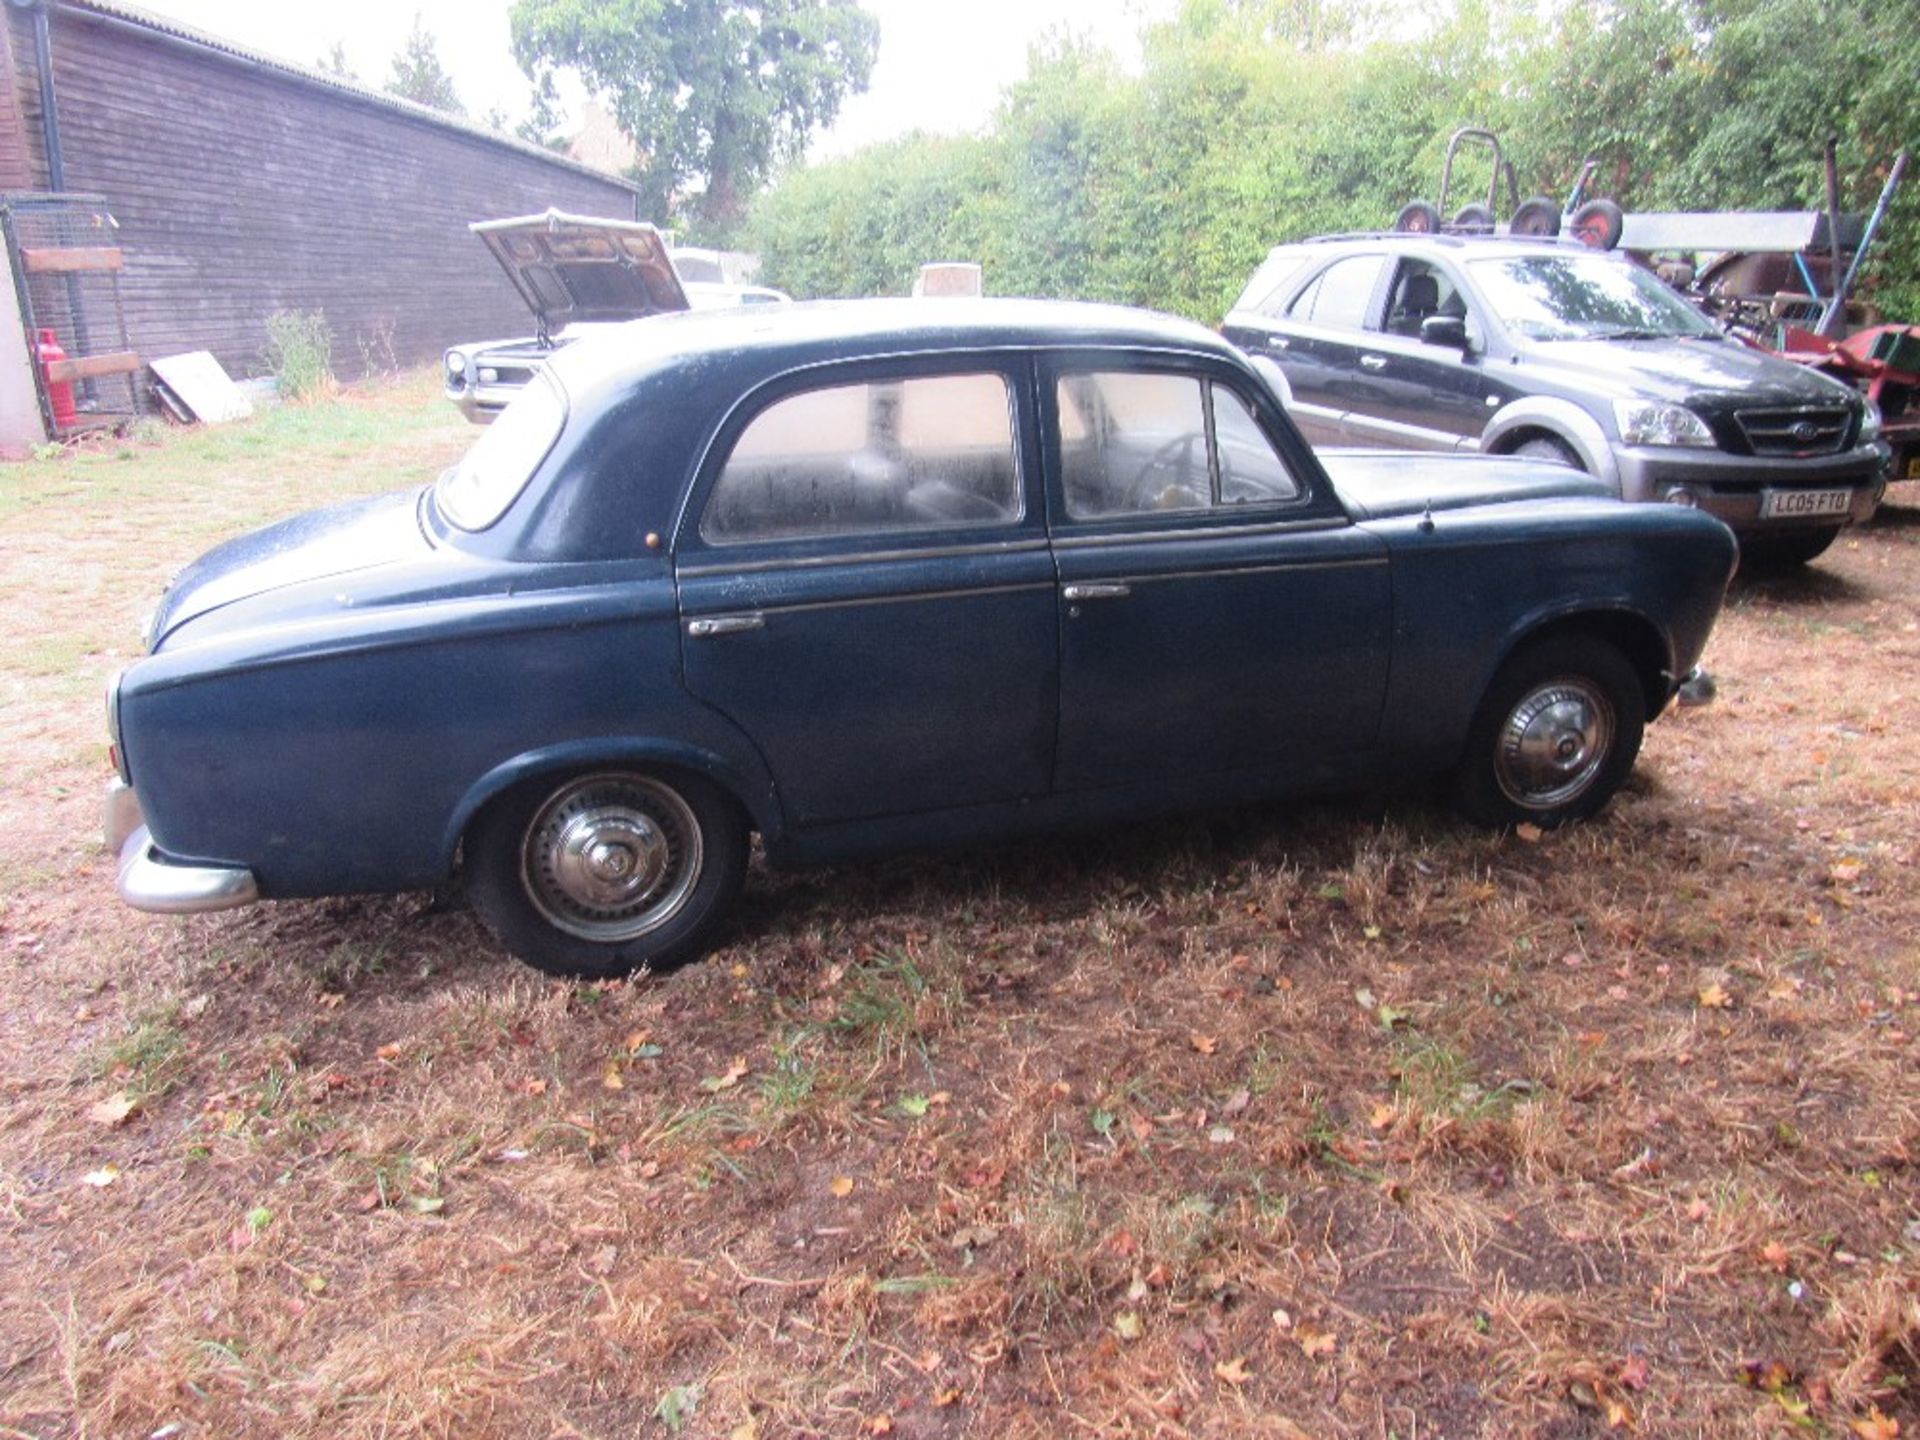 1961 Peugeot 403, reg: 355 XVL, runs and drives, serial number: 2462584, 58,256 miles on clock, - Image 2 of 7